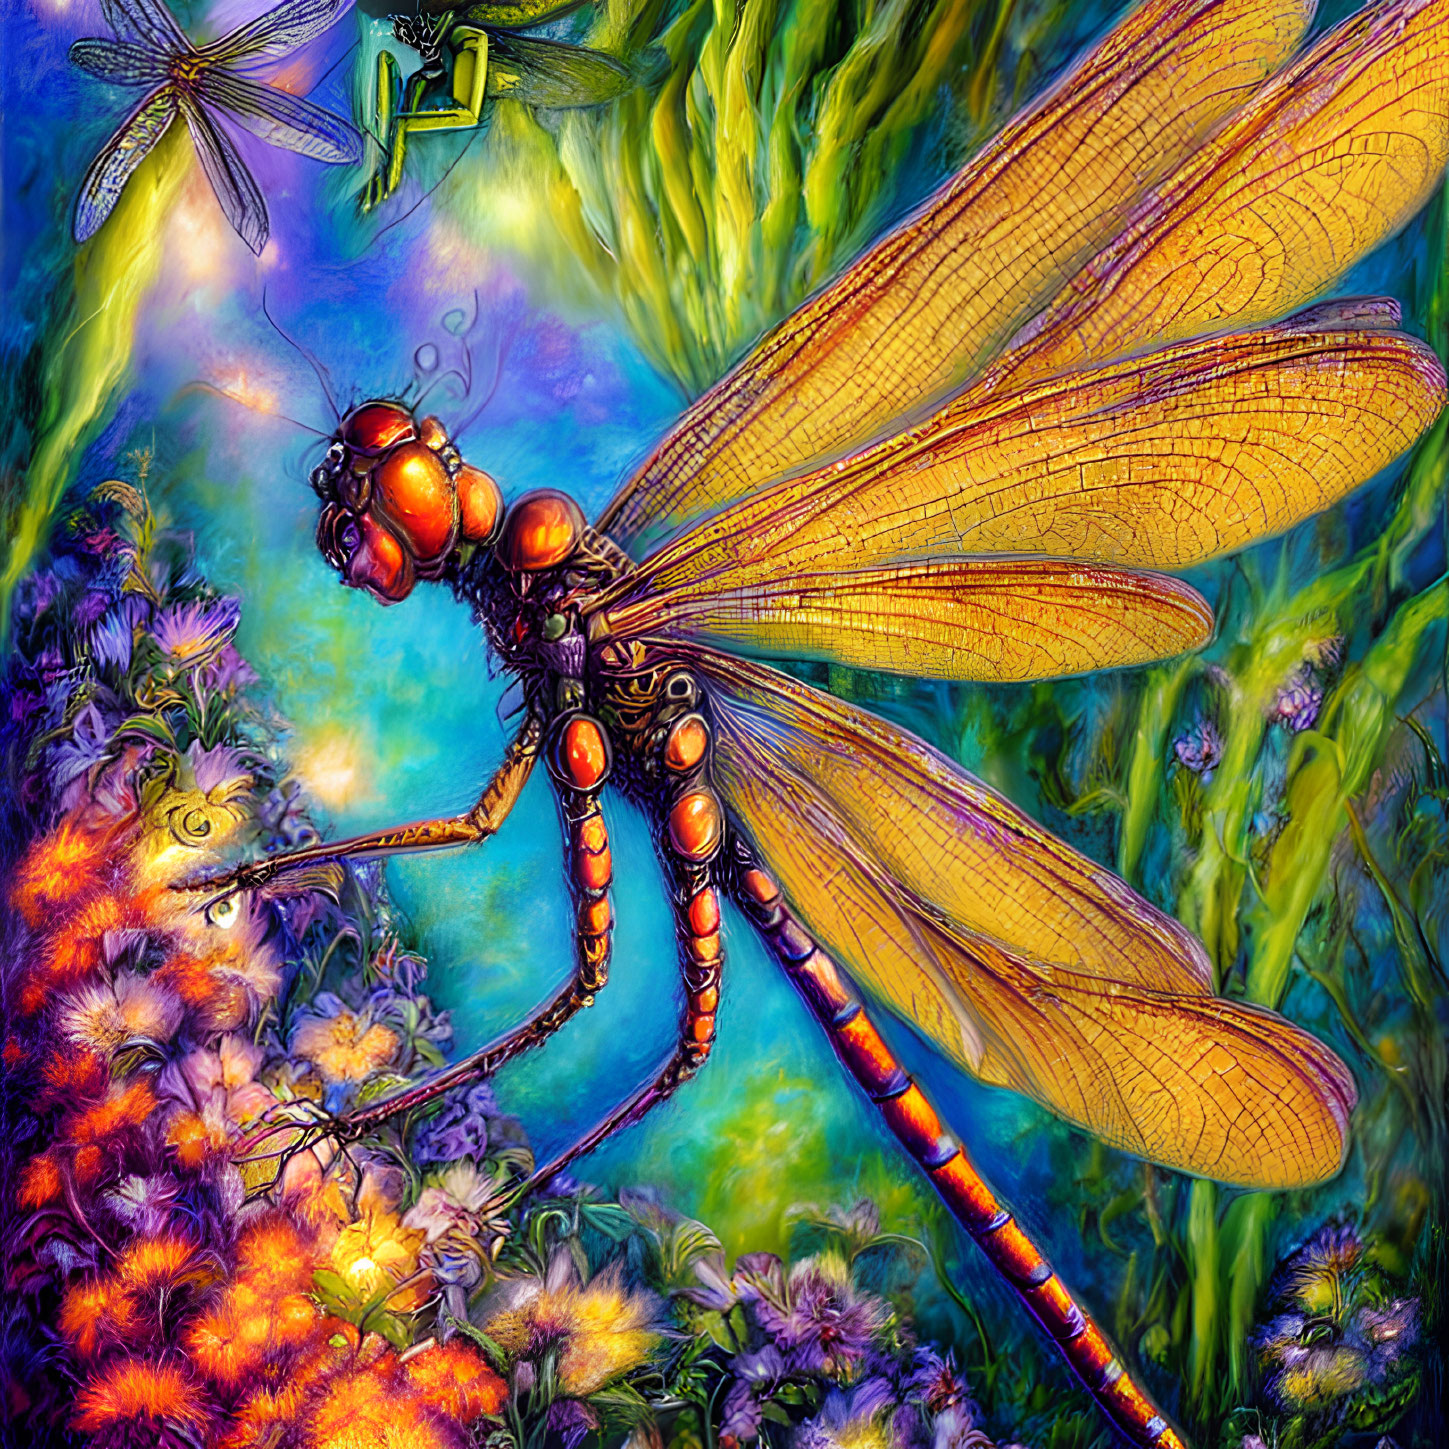 Colorful Dragonfly Illustration on Flora with Fantasy Background